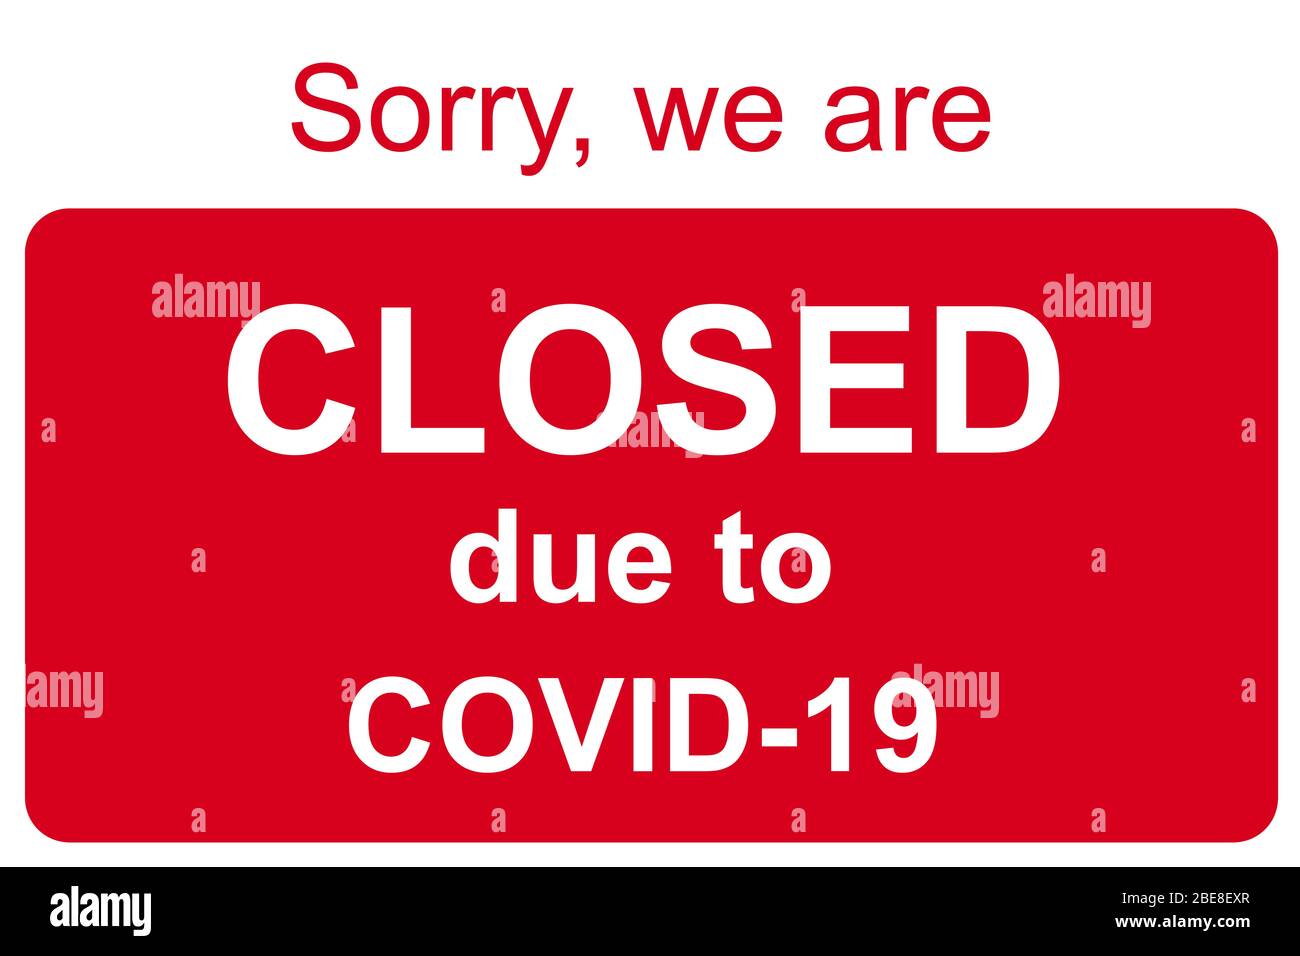 Closed sign of COVID-19 news, information banner with sorry to lockdown of business offices, other public places during coronavirus pandemic. Temporar Stock Photo